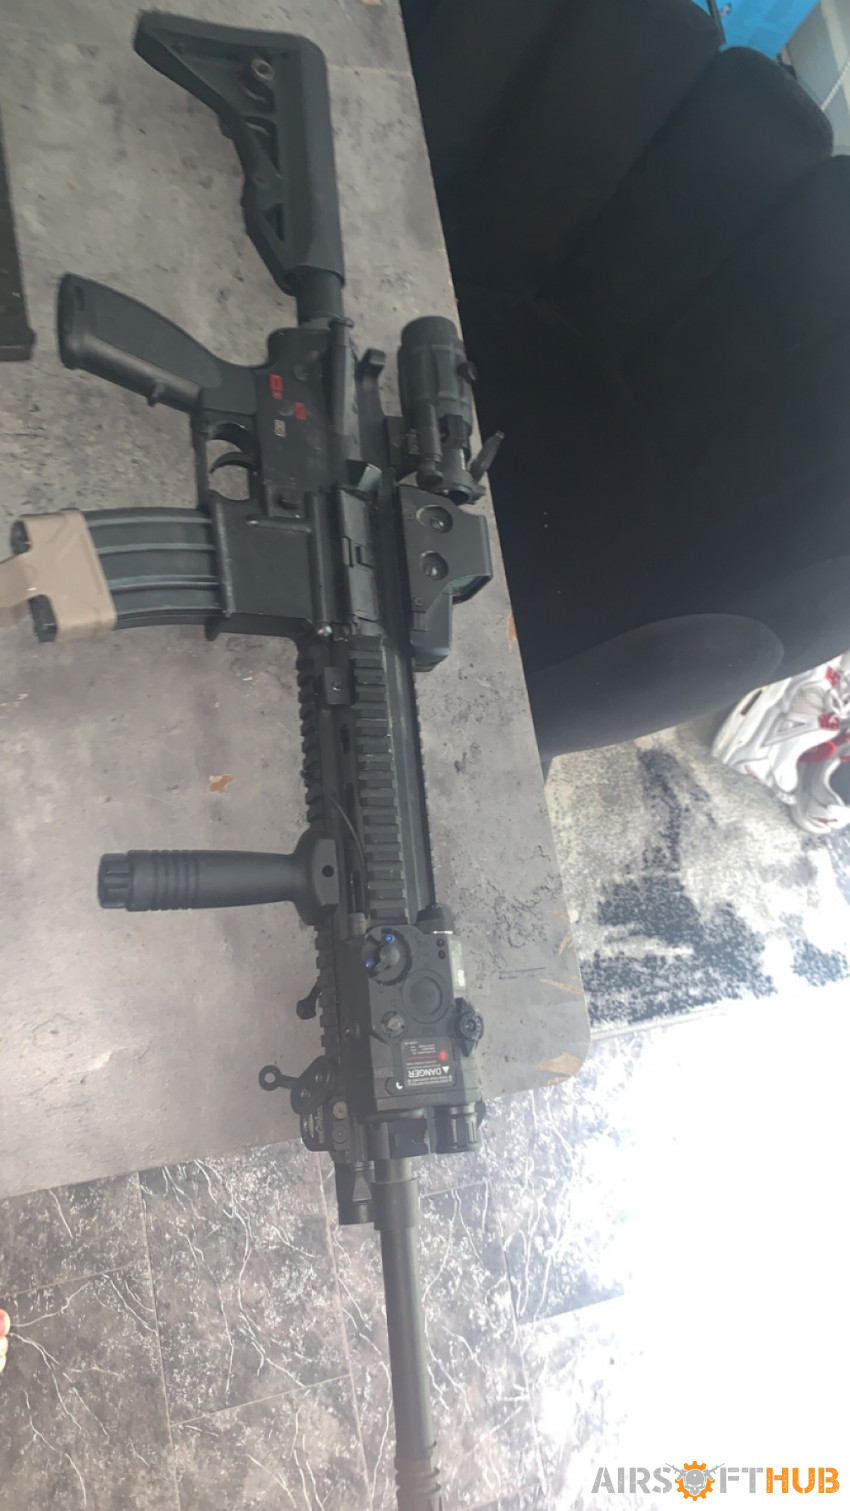 M4 S-SYSTEM COMM. FULL METAL - Used airsoft equipment